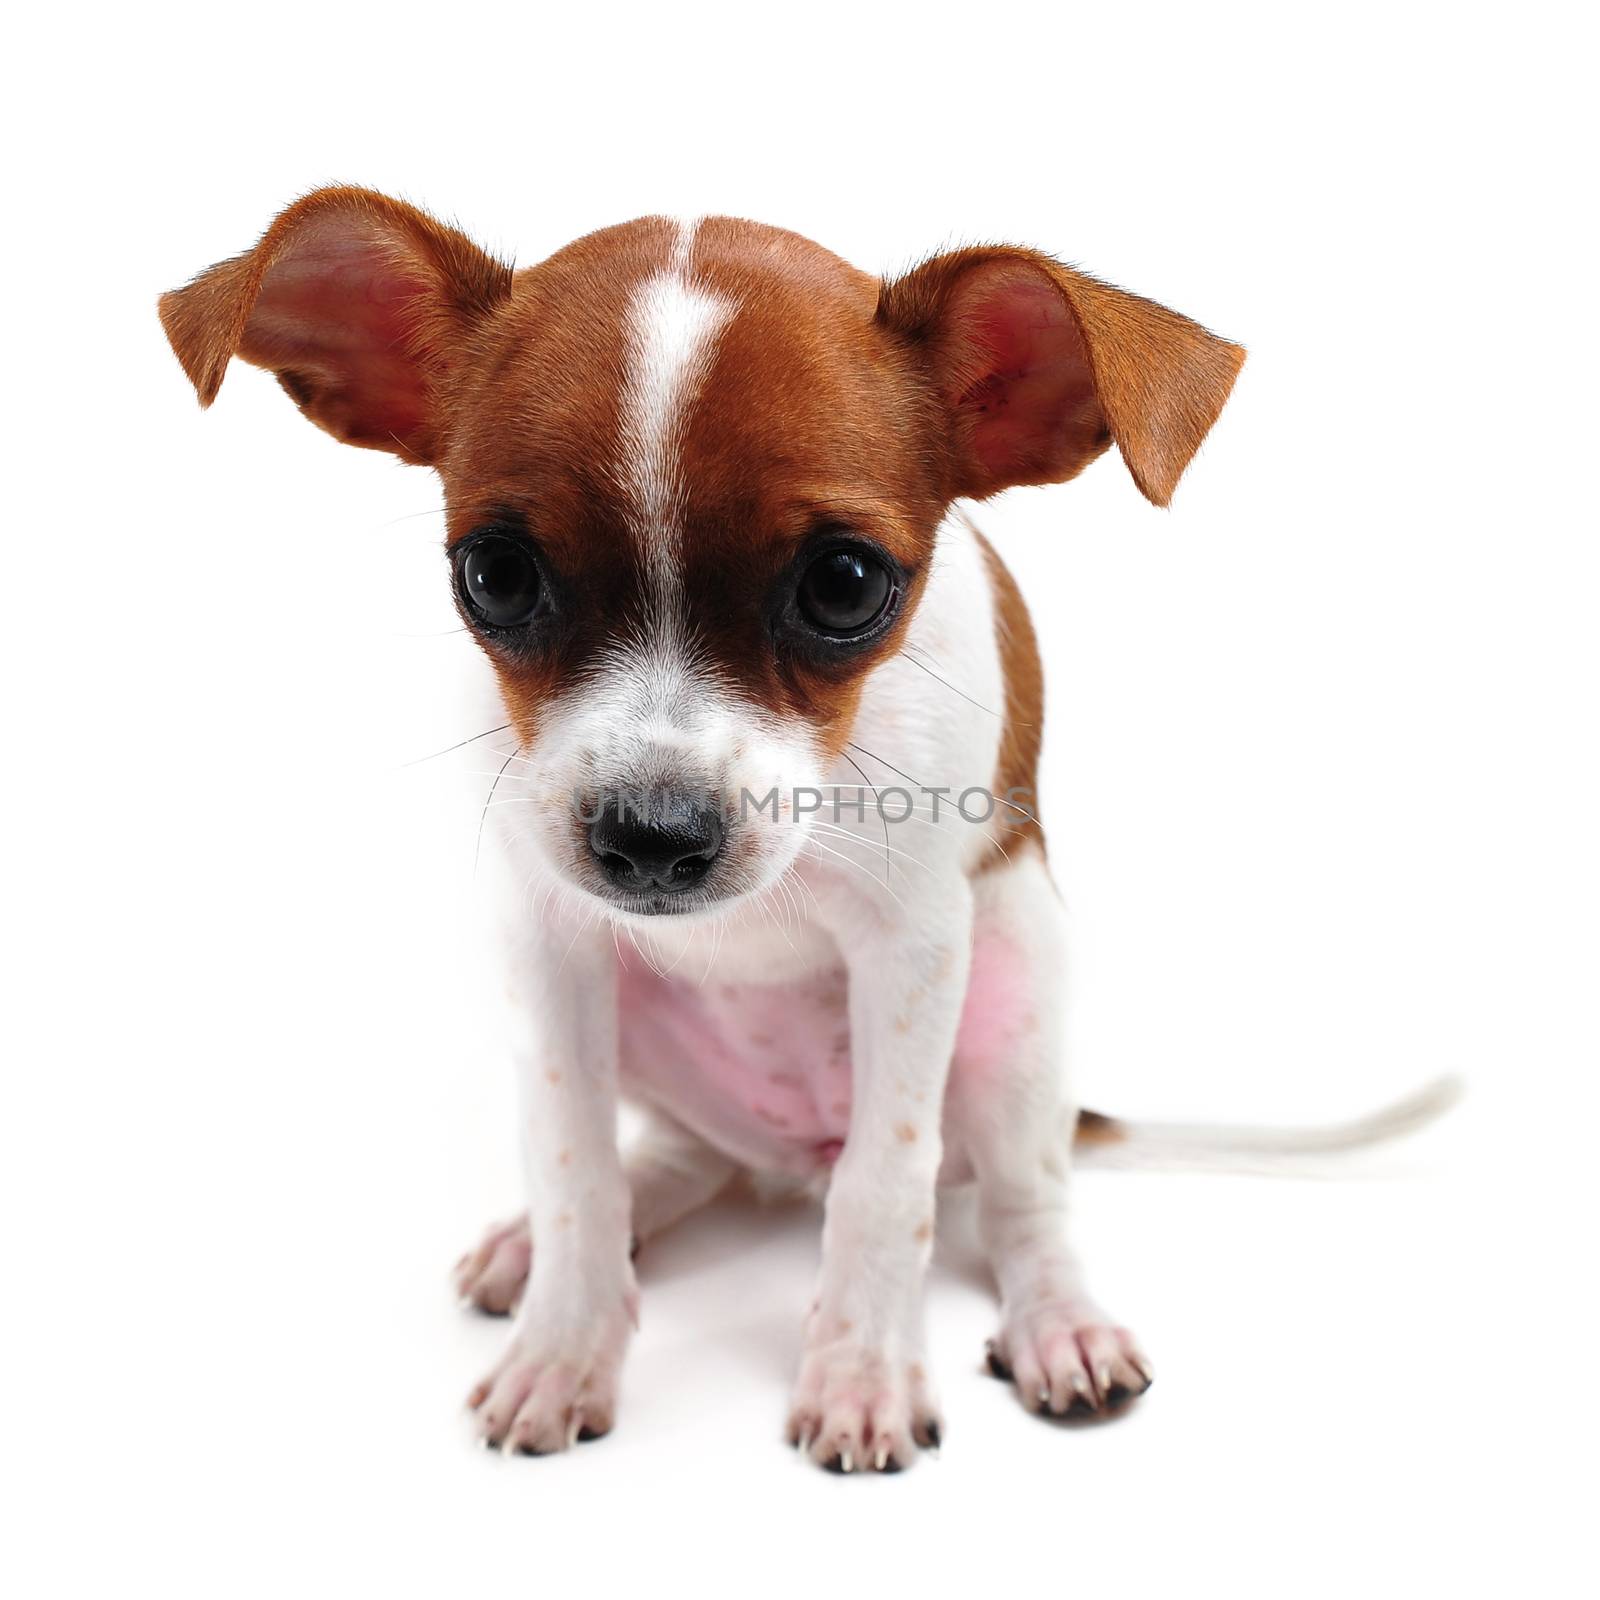 chihuahua isolated on white